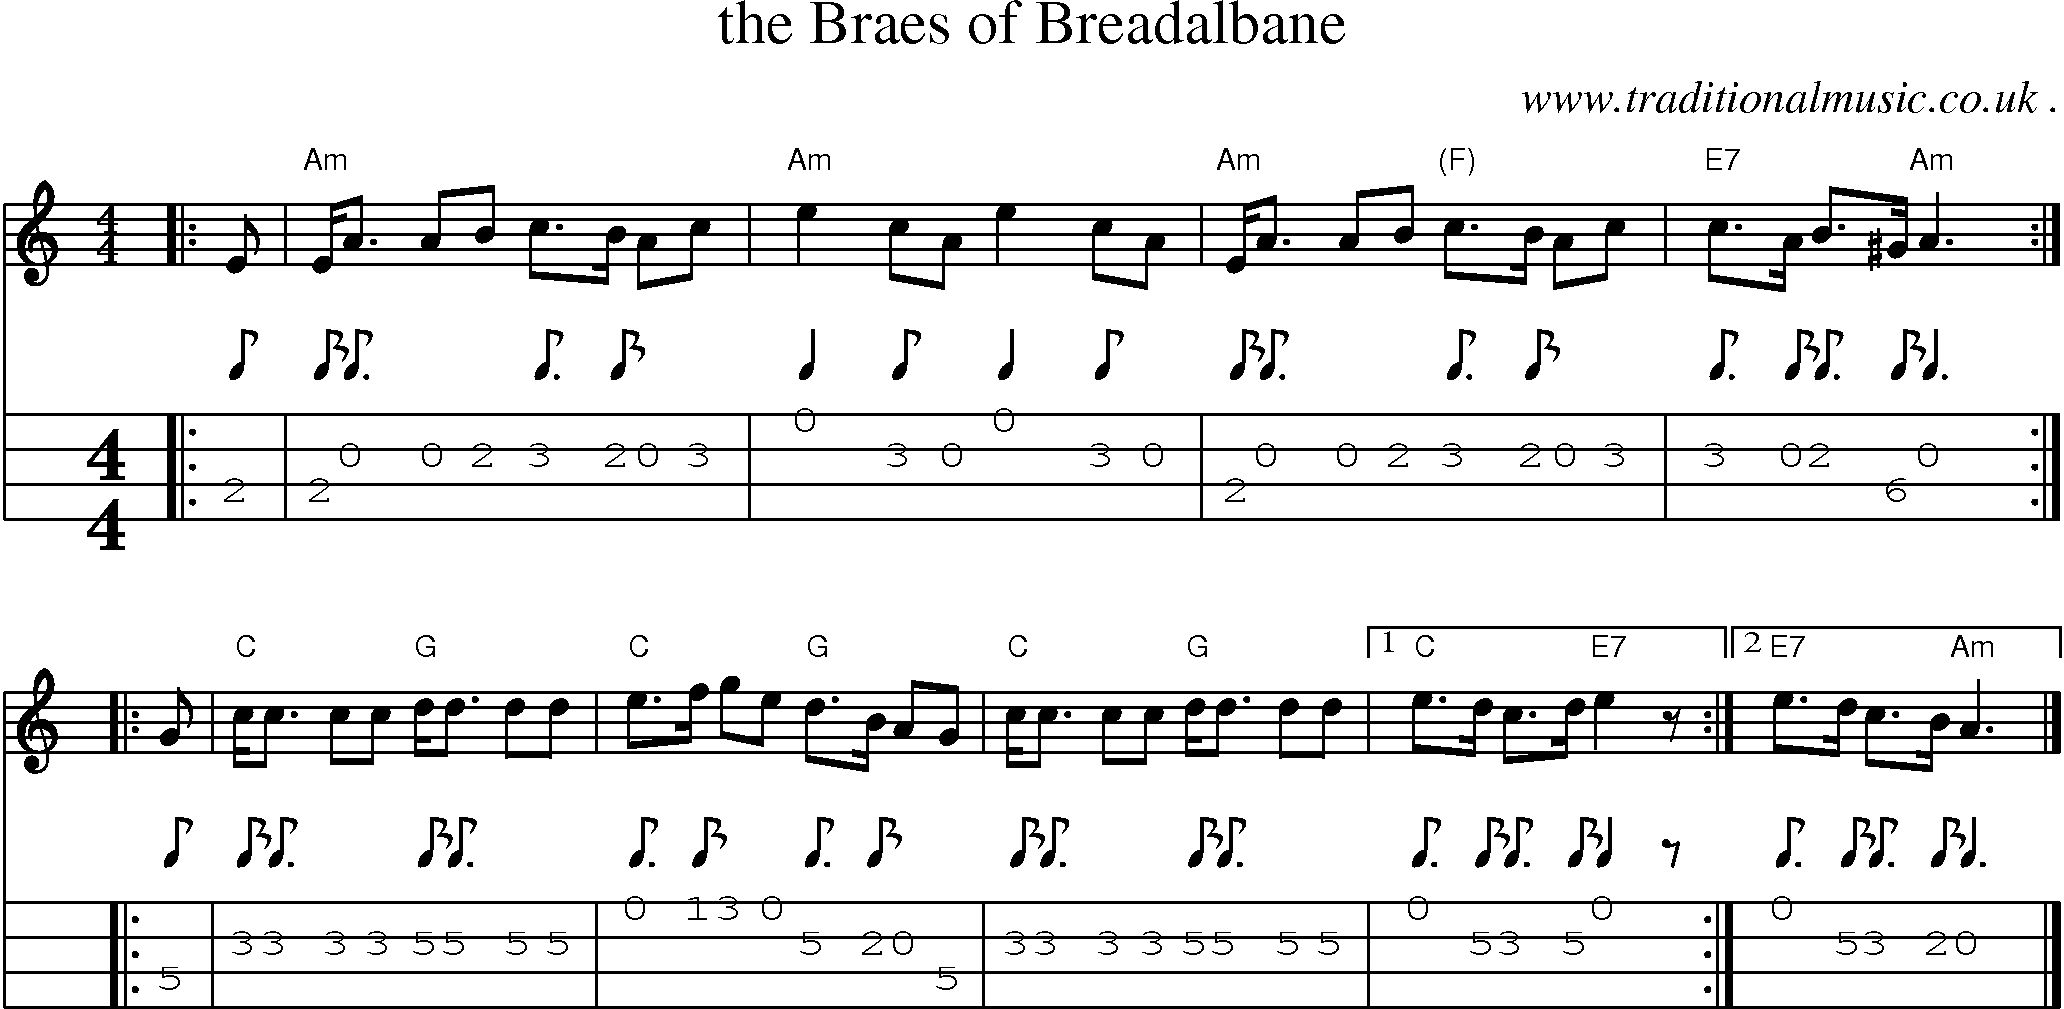 Sheet-music  score, Chords and Mandolin Tabs for The Braes Of Breadalbane